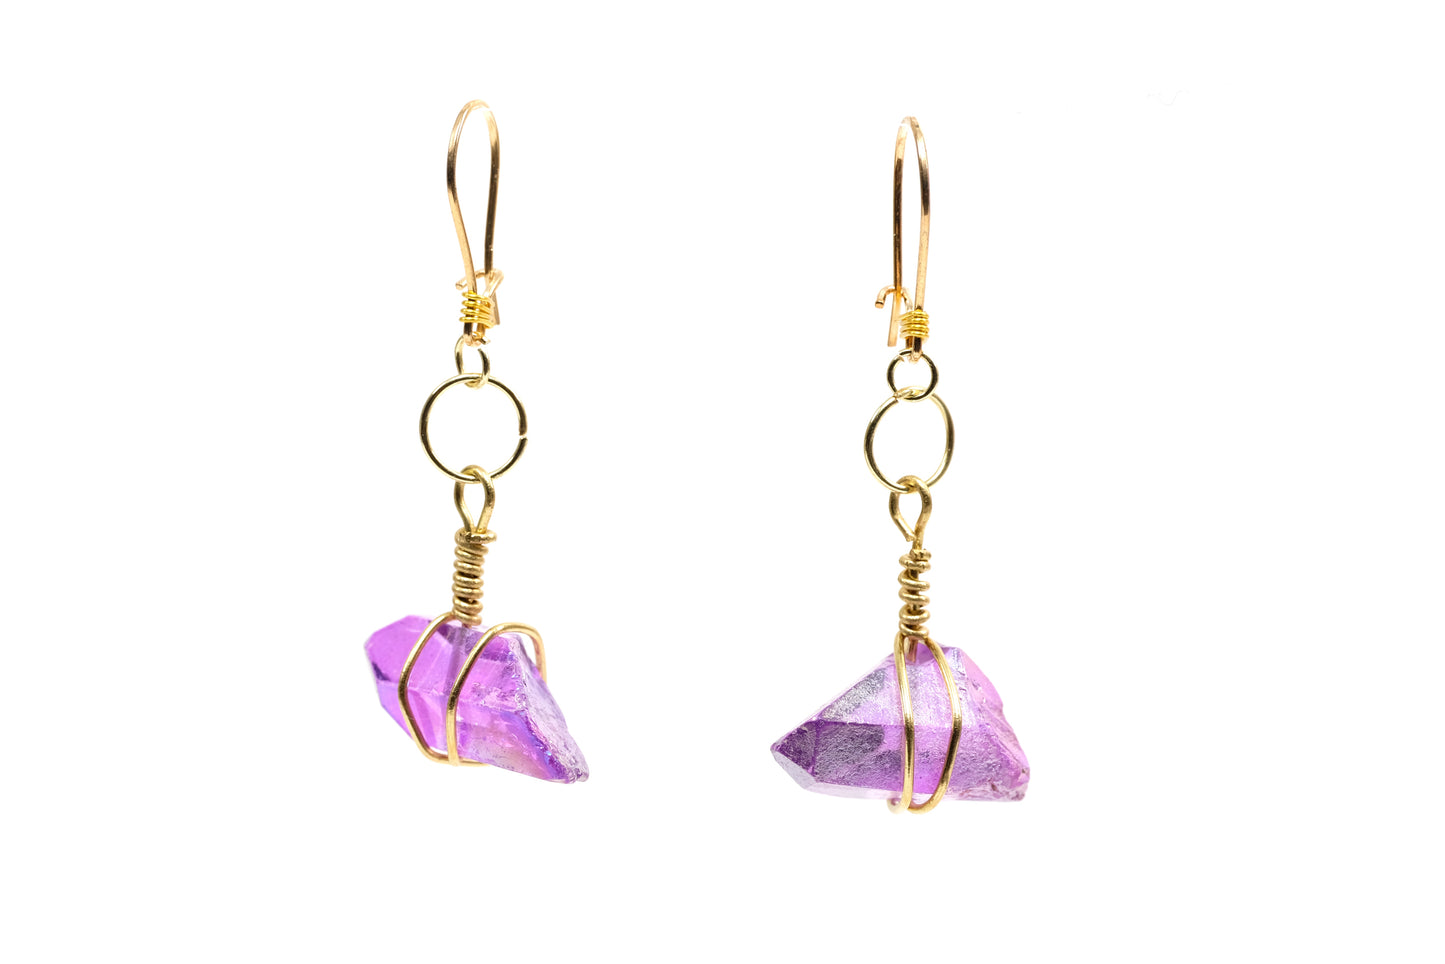 Dewi Maya Jewelry Earrings Wisteria Crystal available at the best boutique in Upstate South Carolina Spartanburg Greenville Dewi Maya Boutique